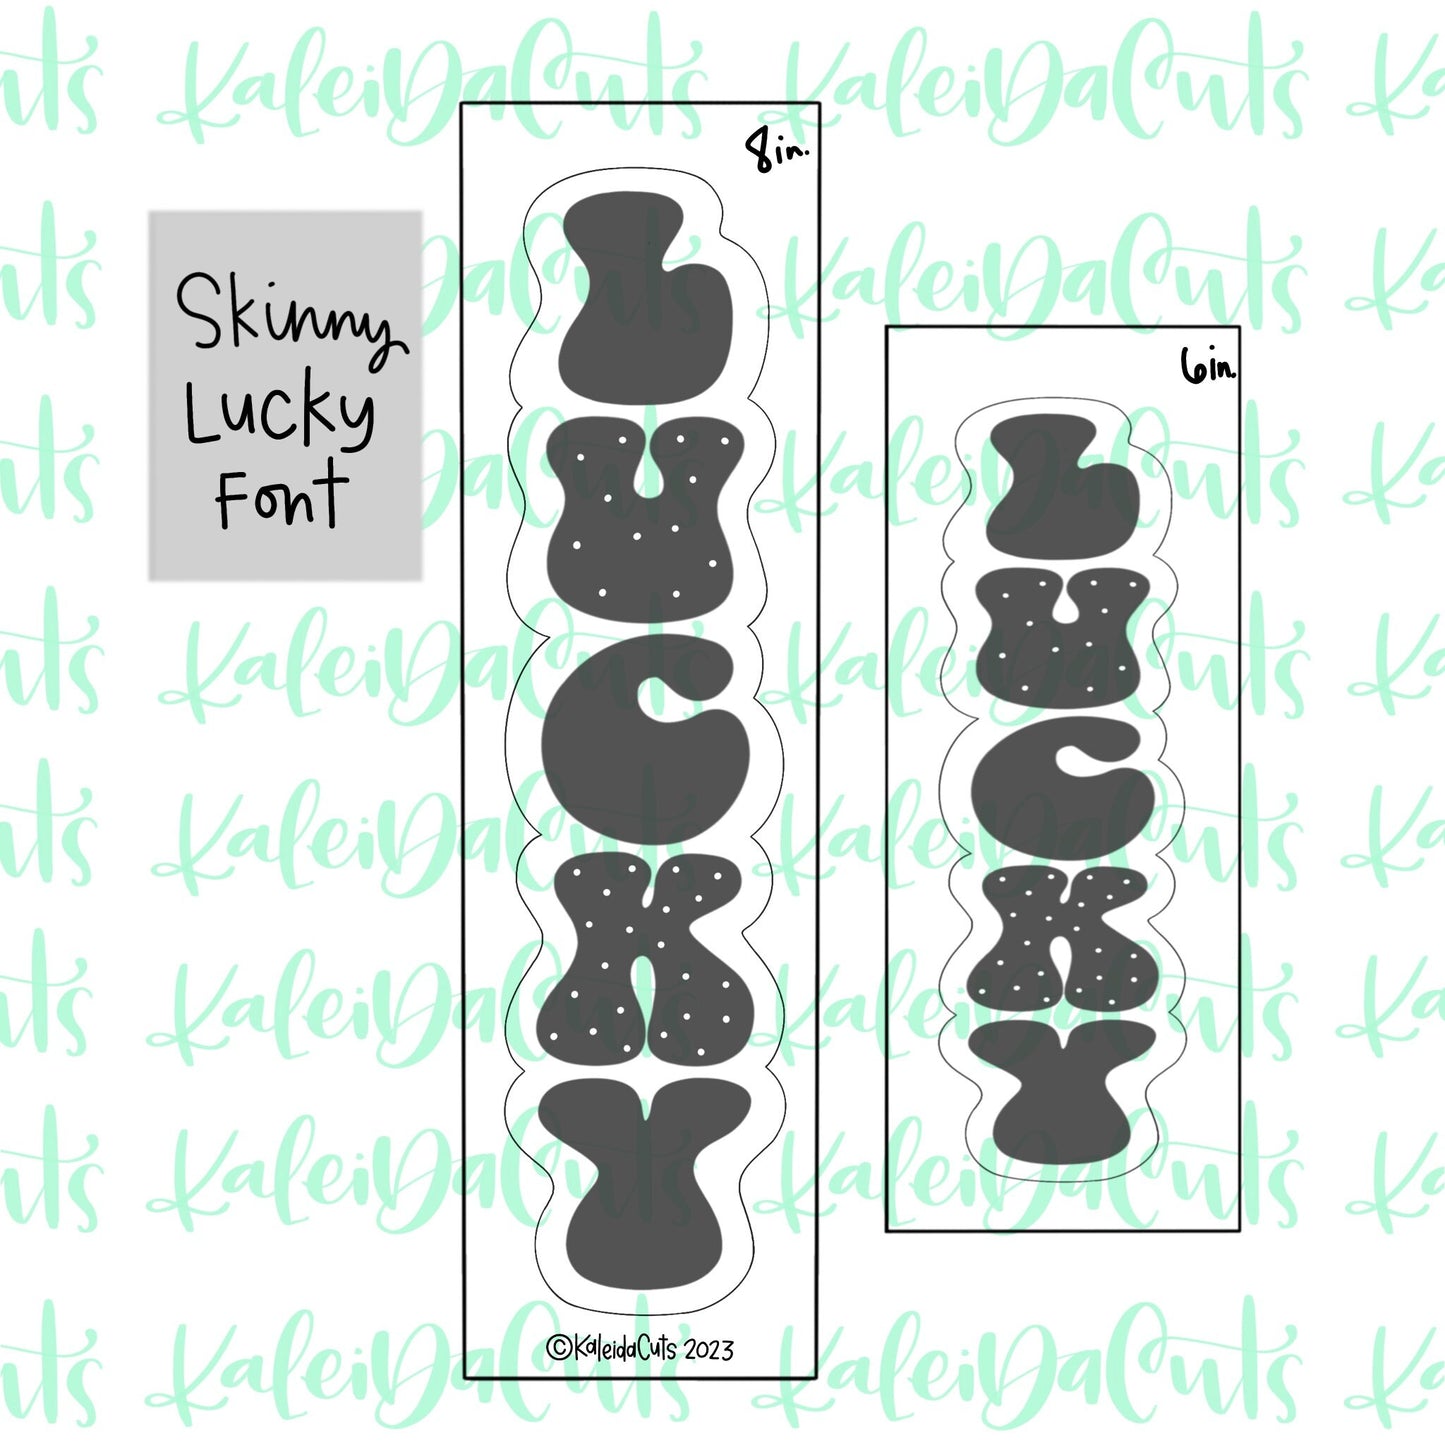 Skinny Lucky Font Cookie Cutter